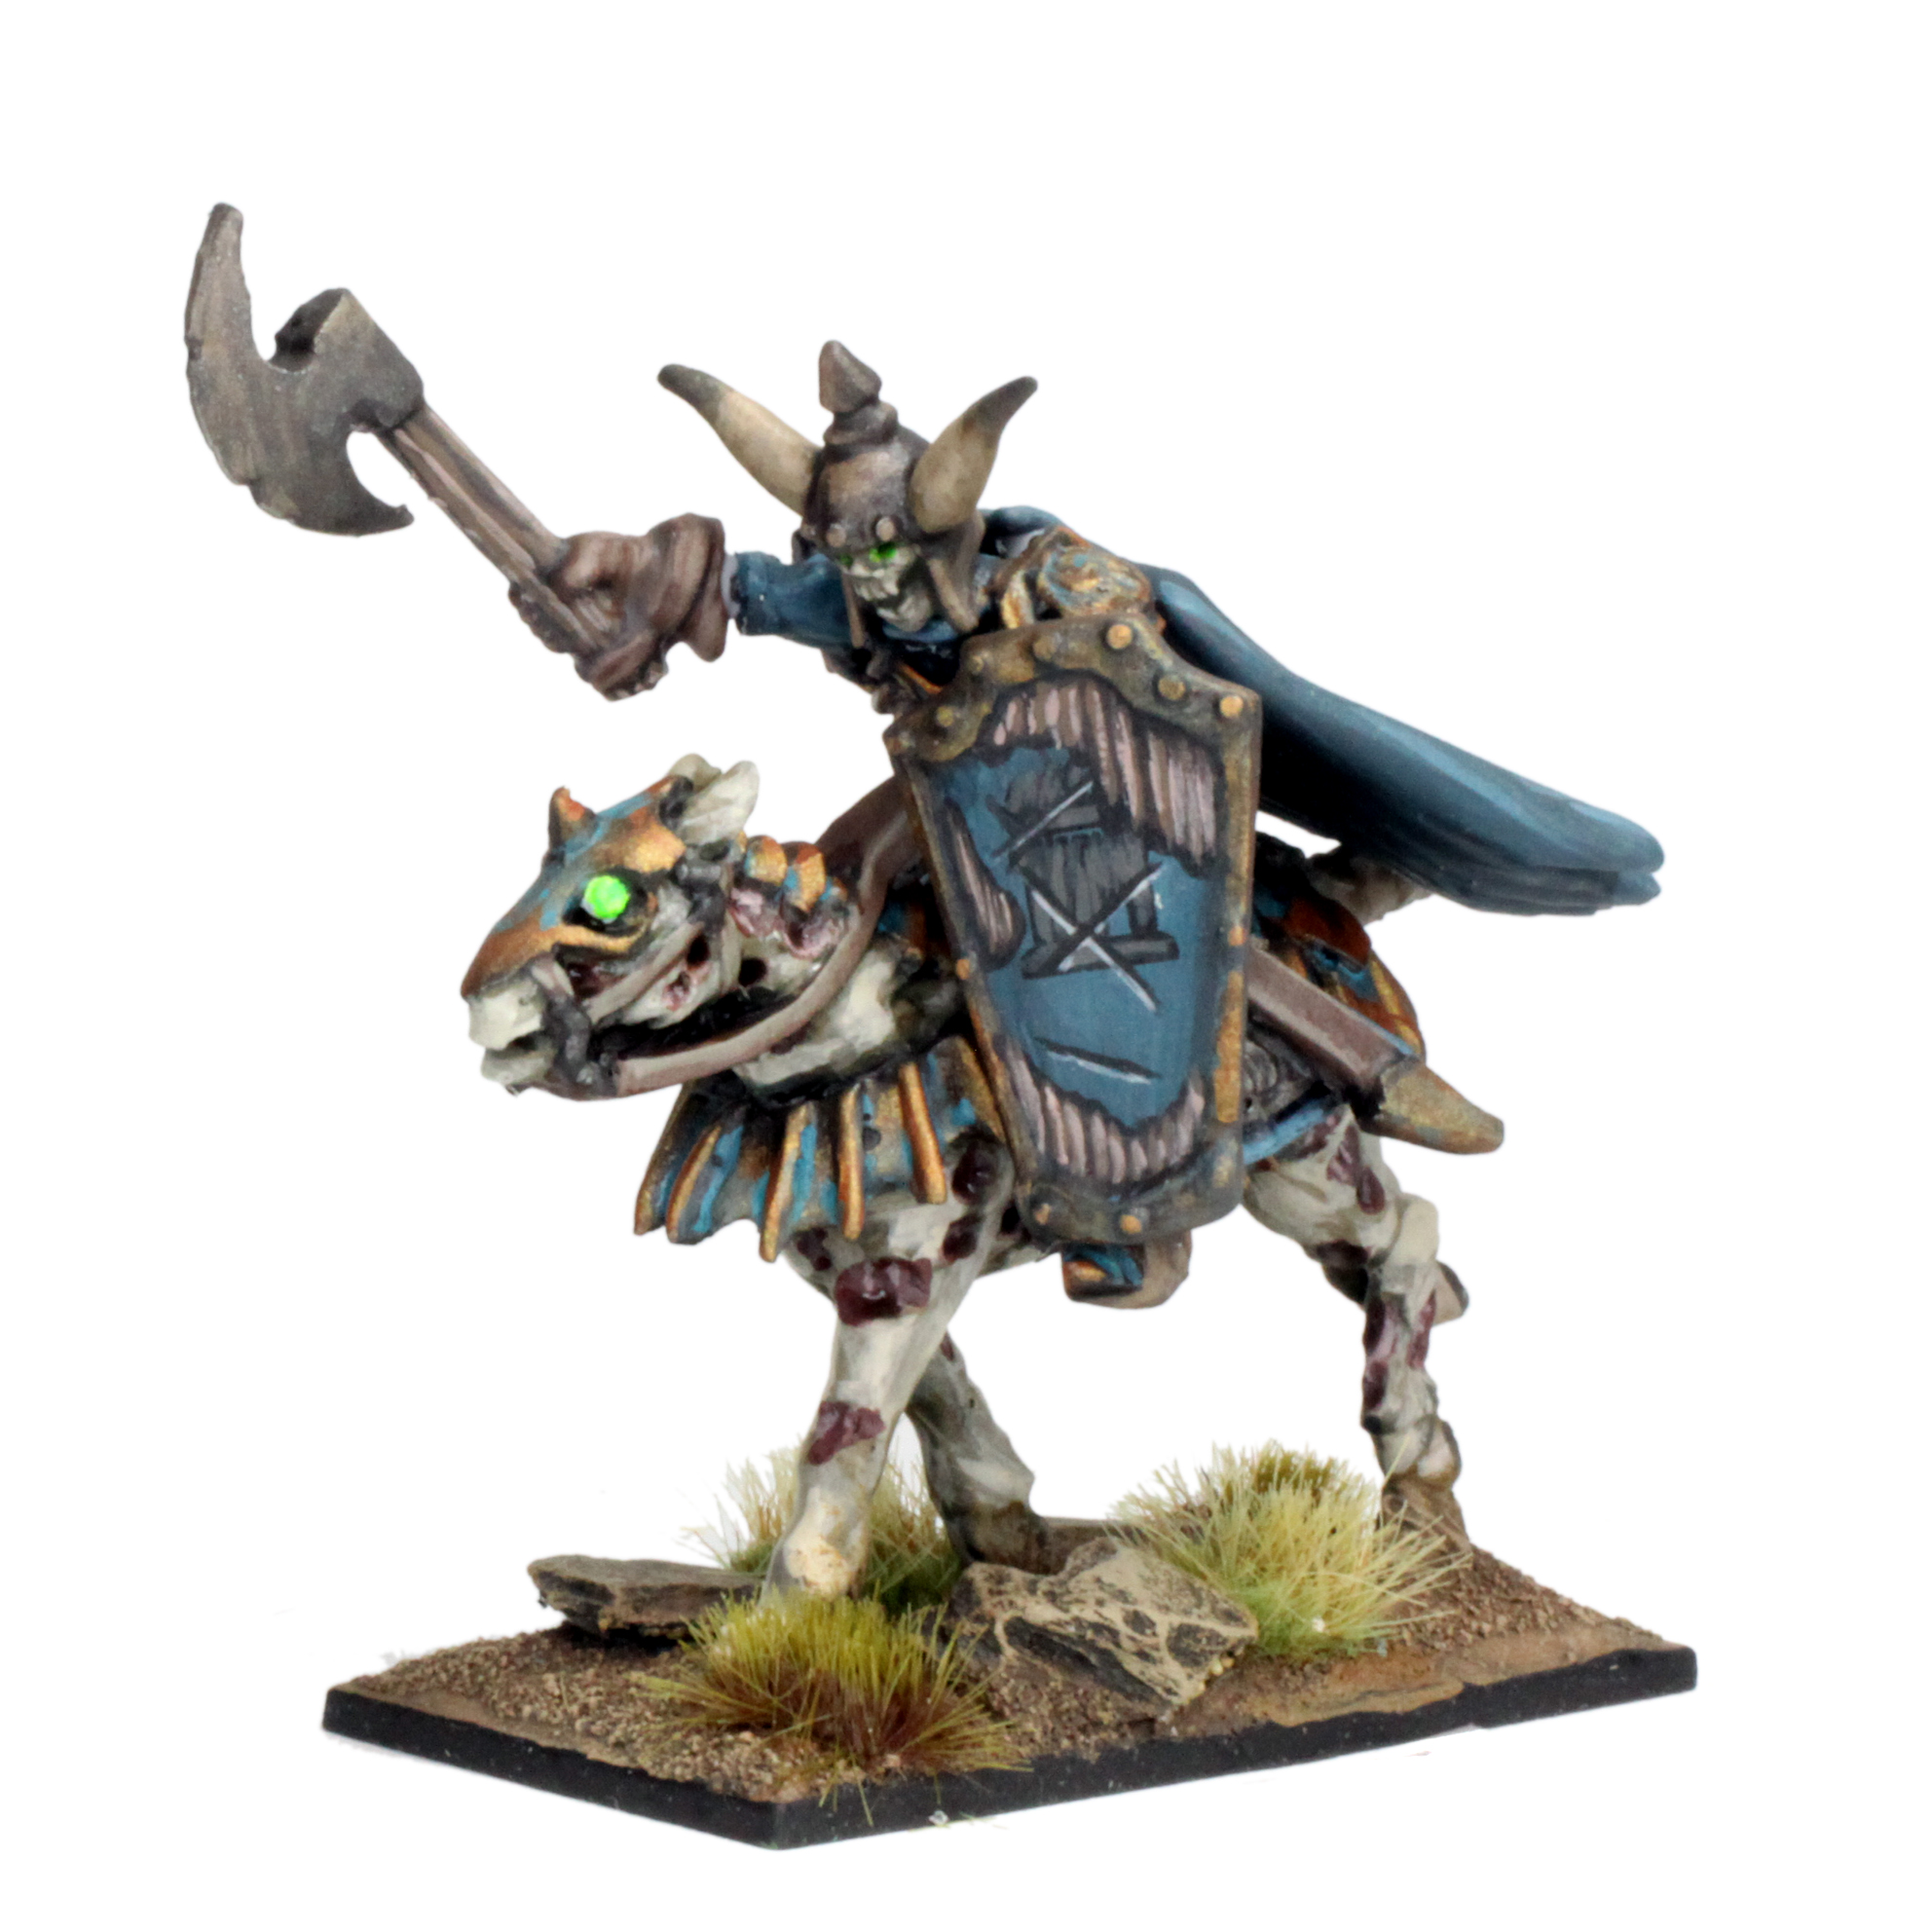 New releases for July 2021. New Viking Warlord & The Black Knight await your armies.